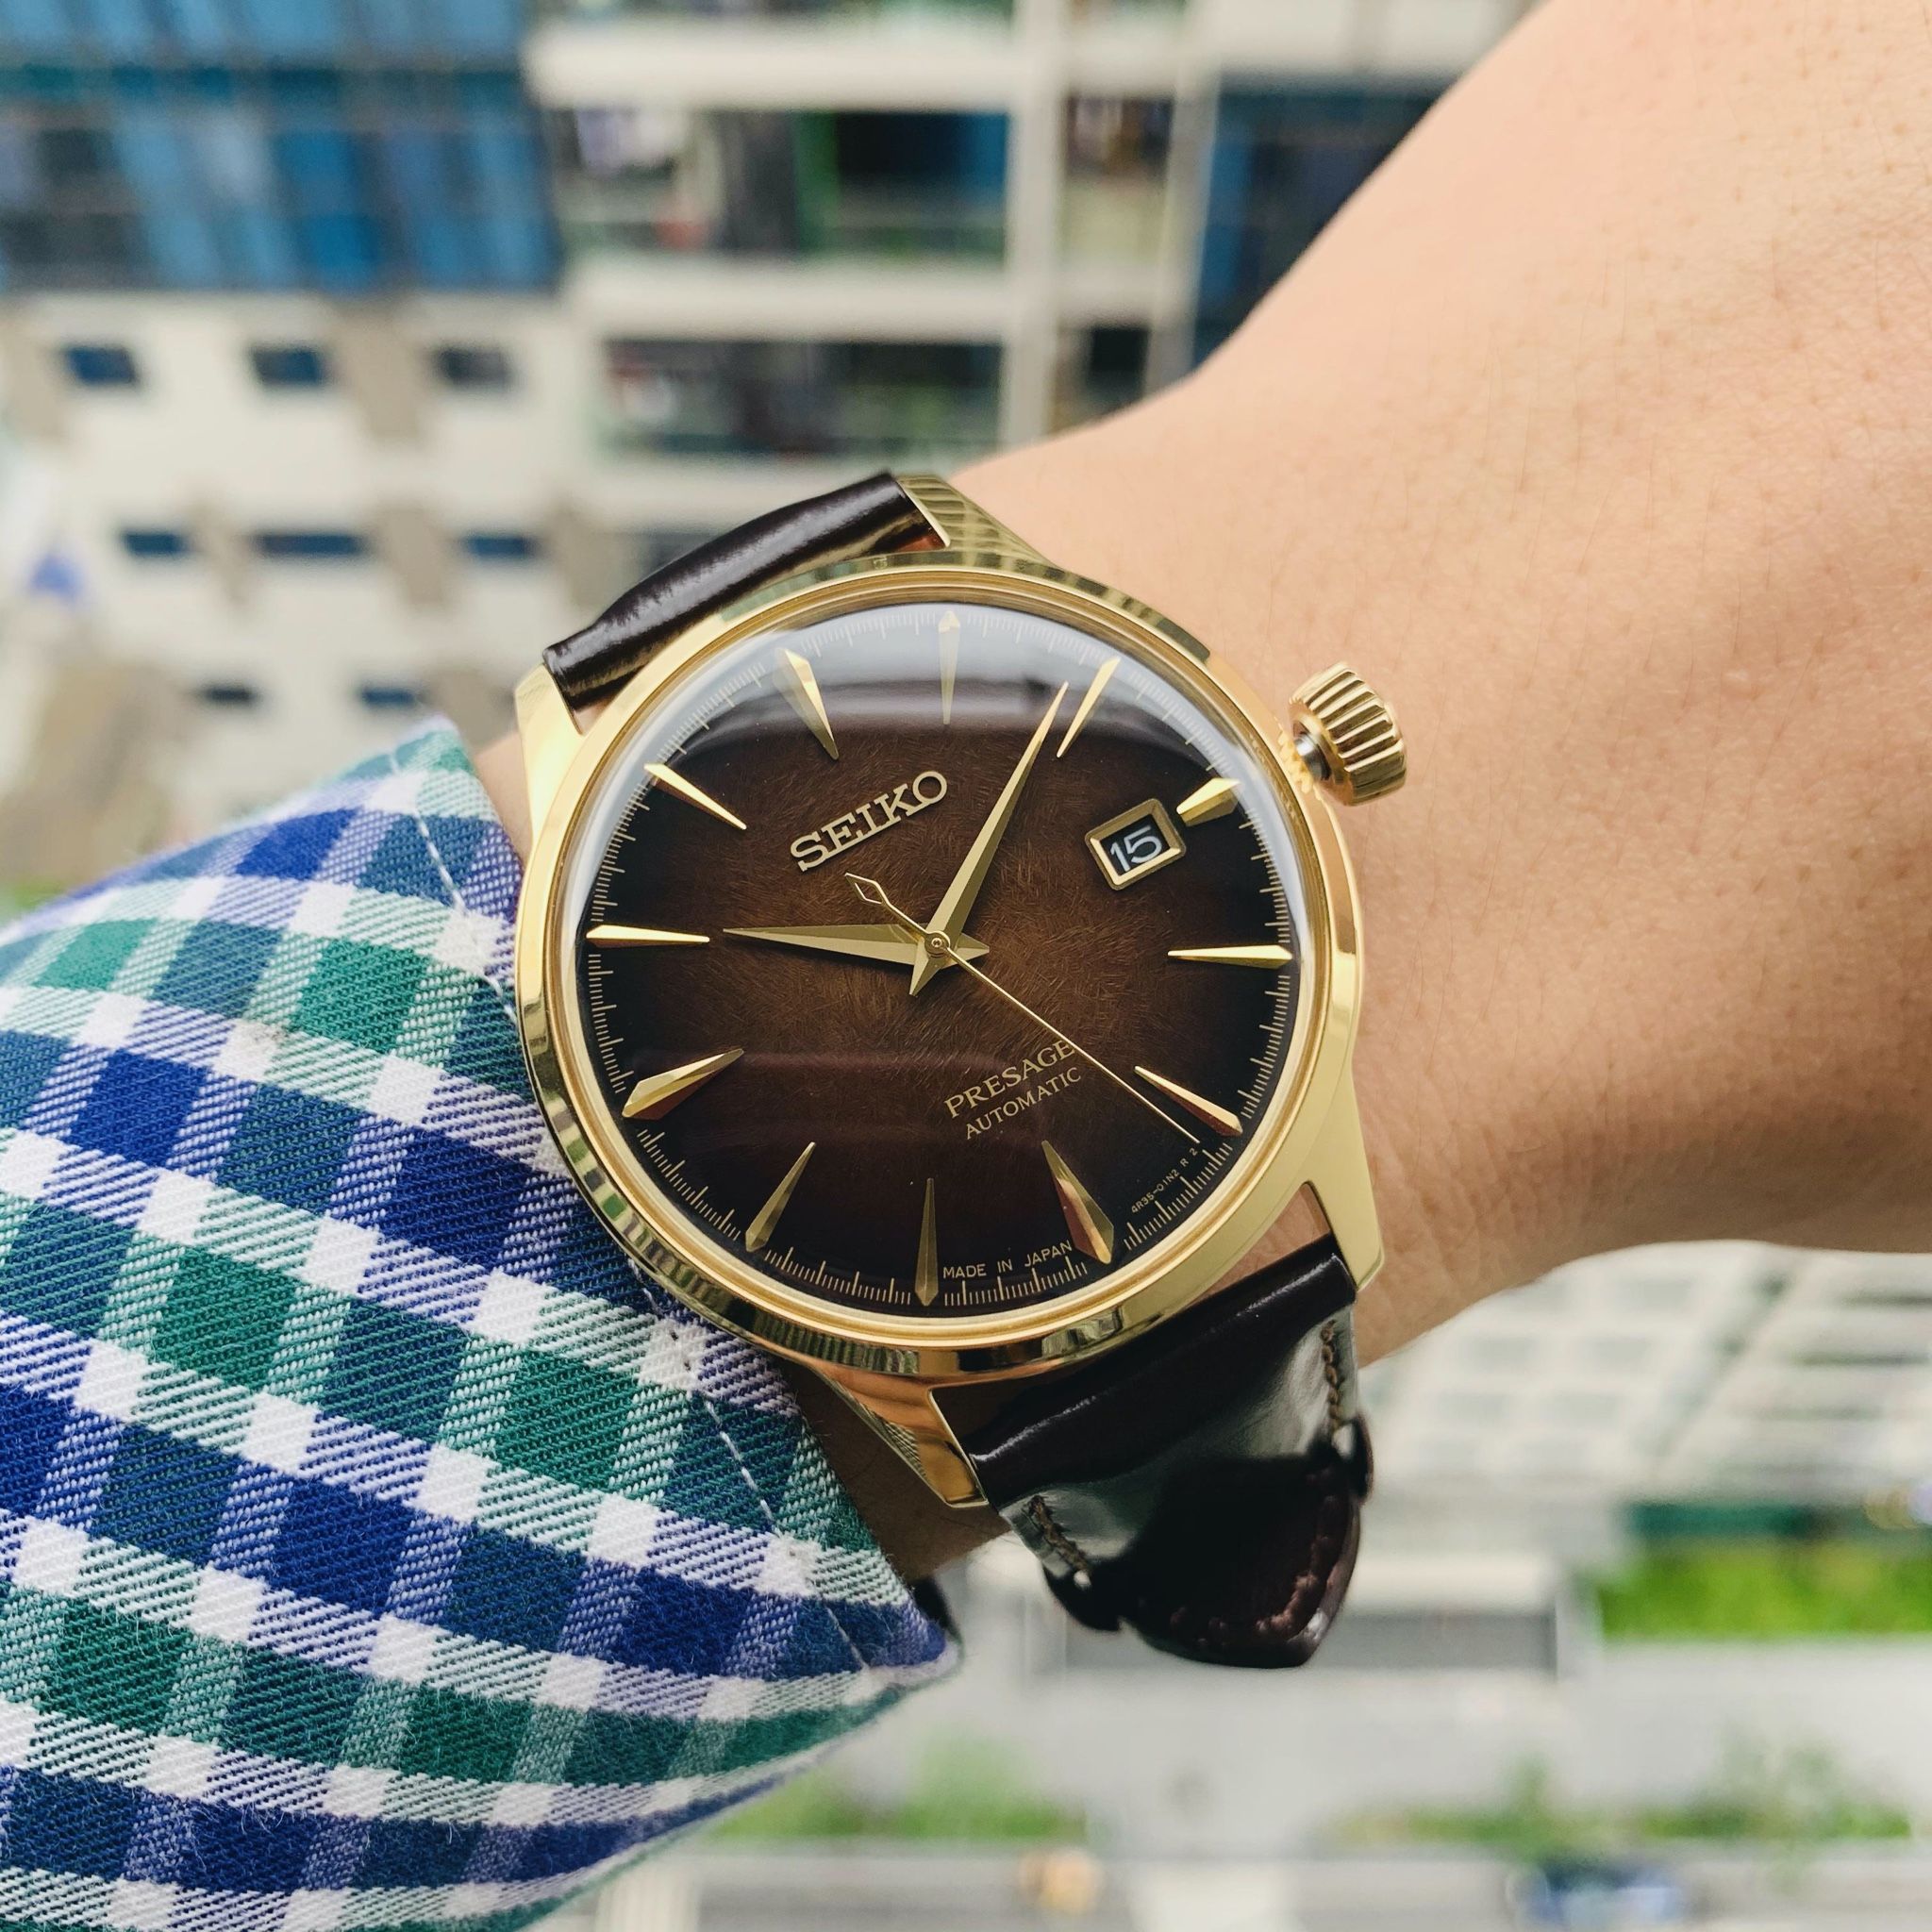 Arriba 60+ imagen seiko cocktail limited edition